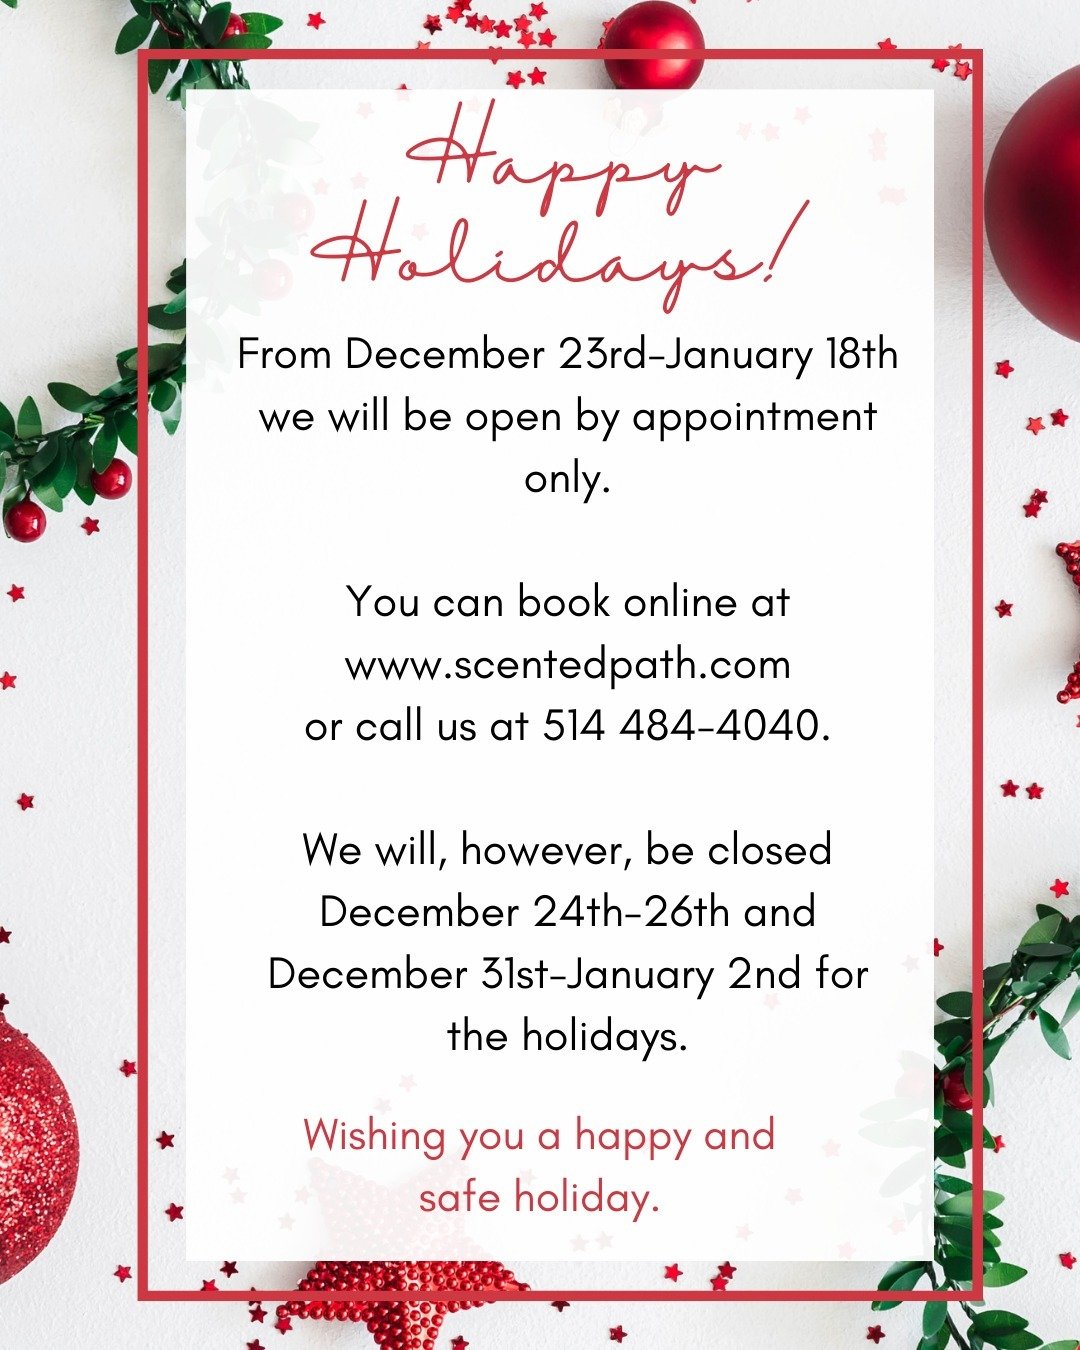 Happy Holidays!!!

As we will be spending time with our families this holiday season, we have limited hours. Our holiday schedule is:

⭐️ Closed December 24th-26th and December 31st-January 2nd

⭐️ From December 23rd-January 18th we will be open by a